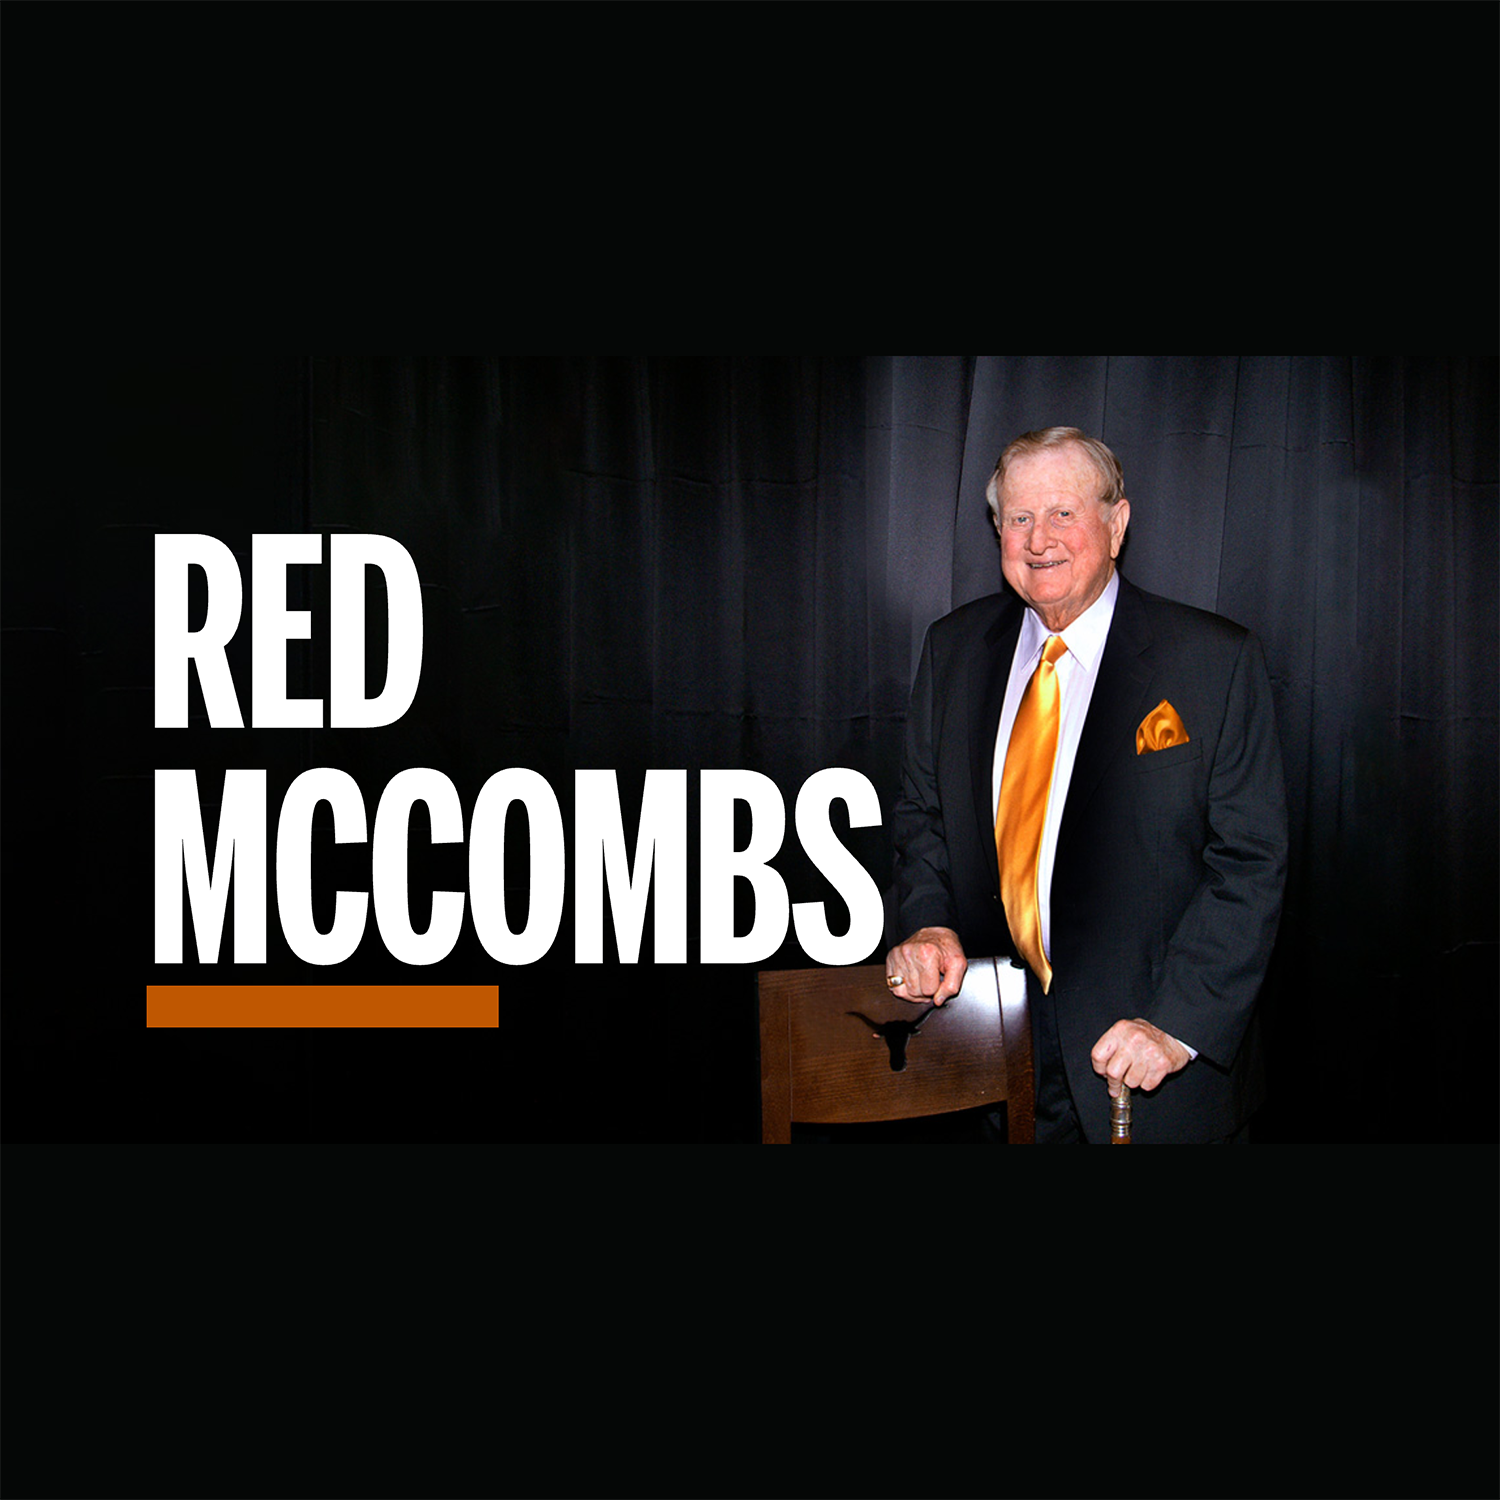 UT Tower Shines for Red McCombs